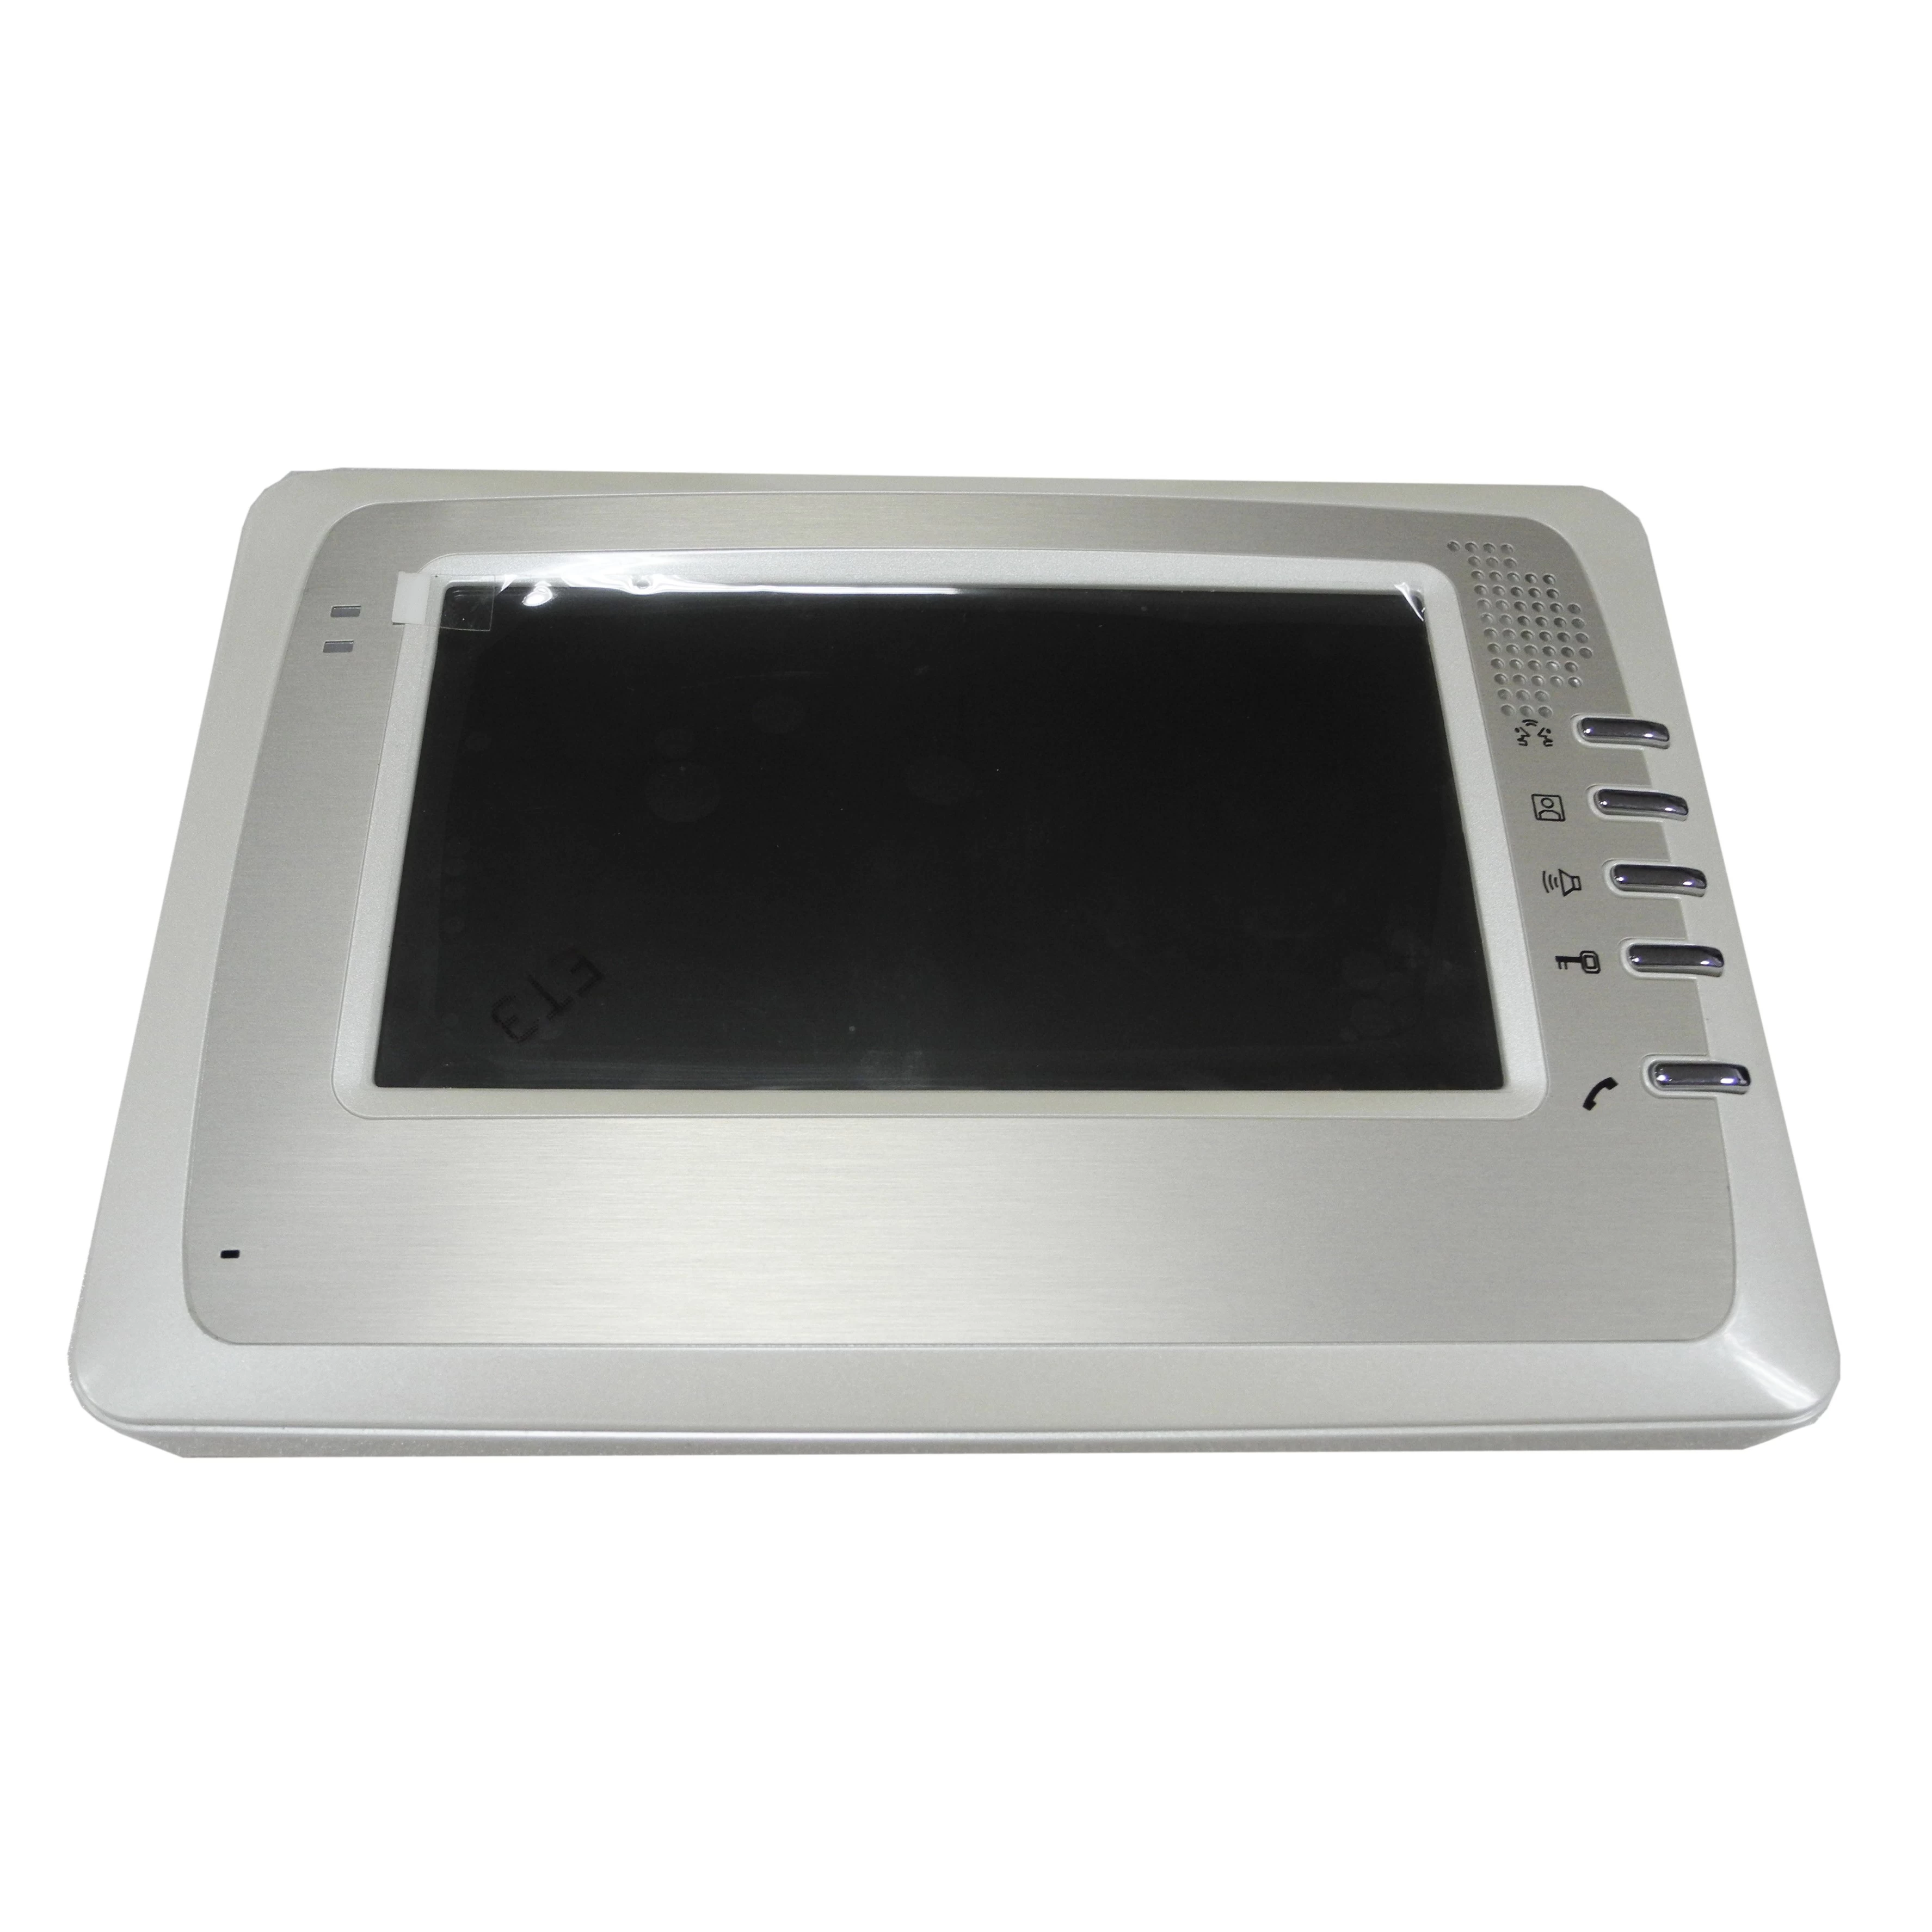 China 7 inch 2 Wire DIY Handfree Monitor For Building Entry System  PY-M8A373C manufacturer